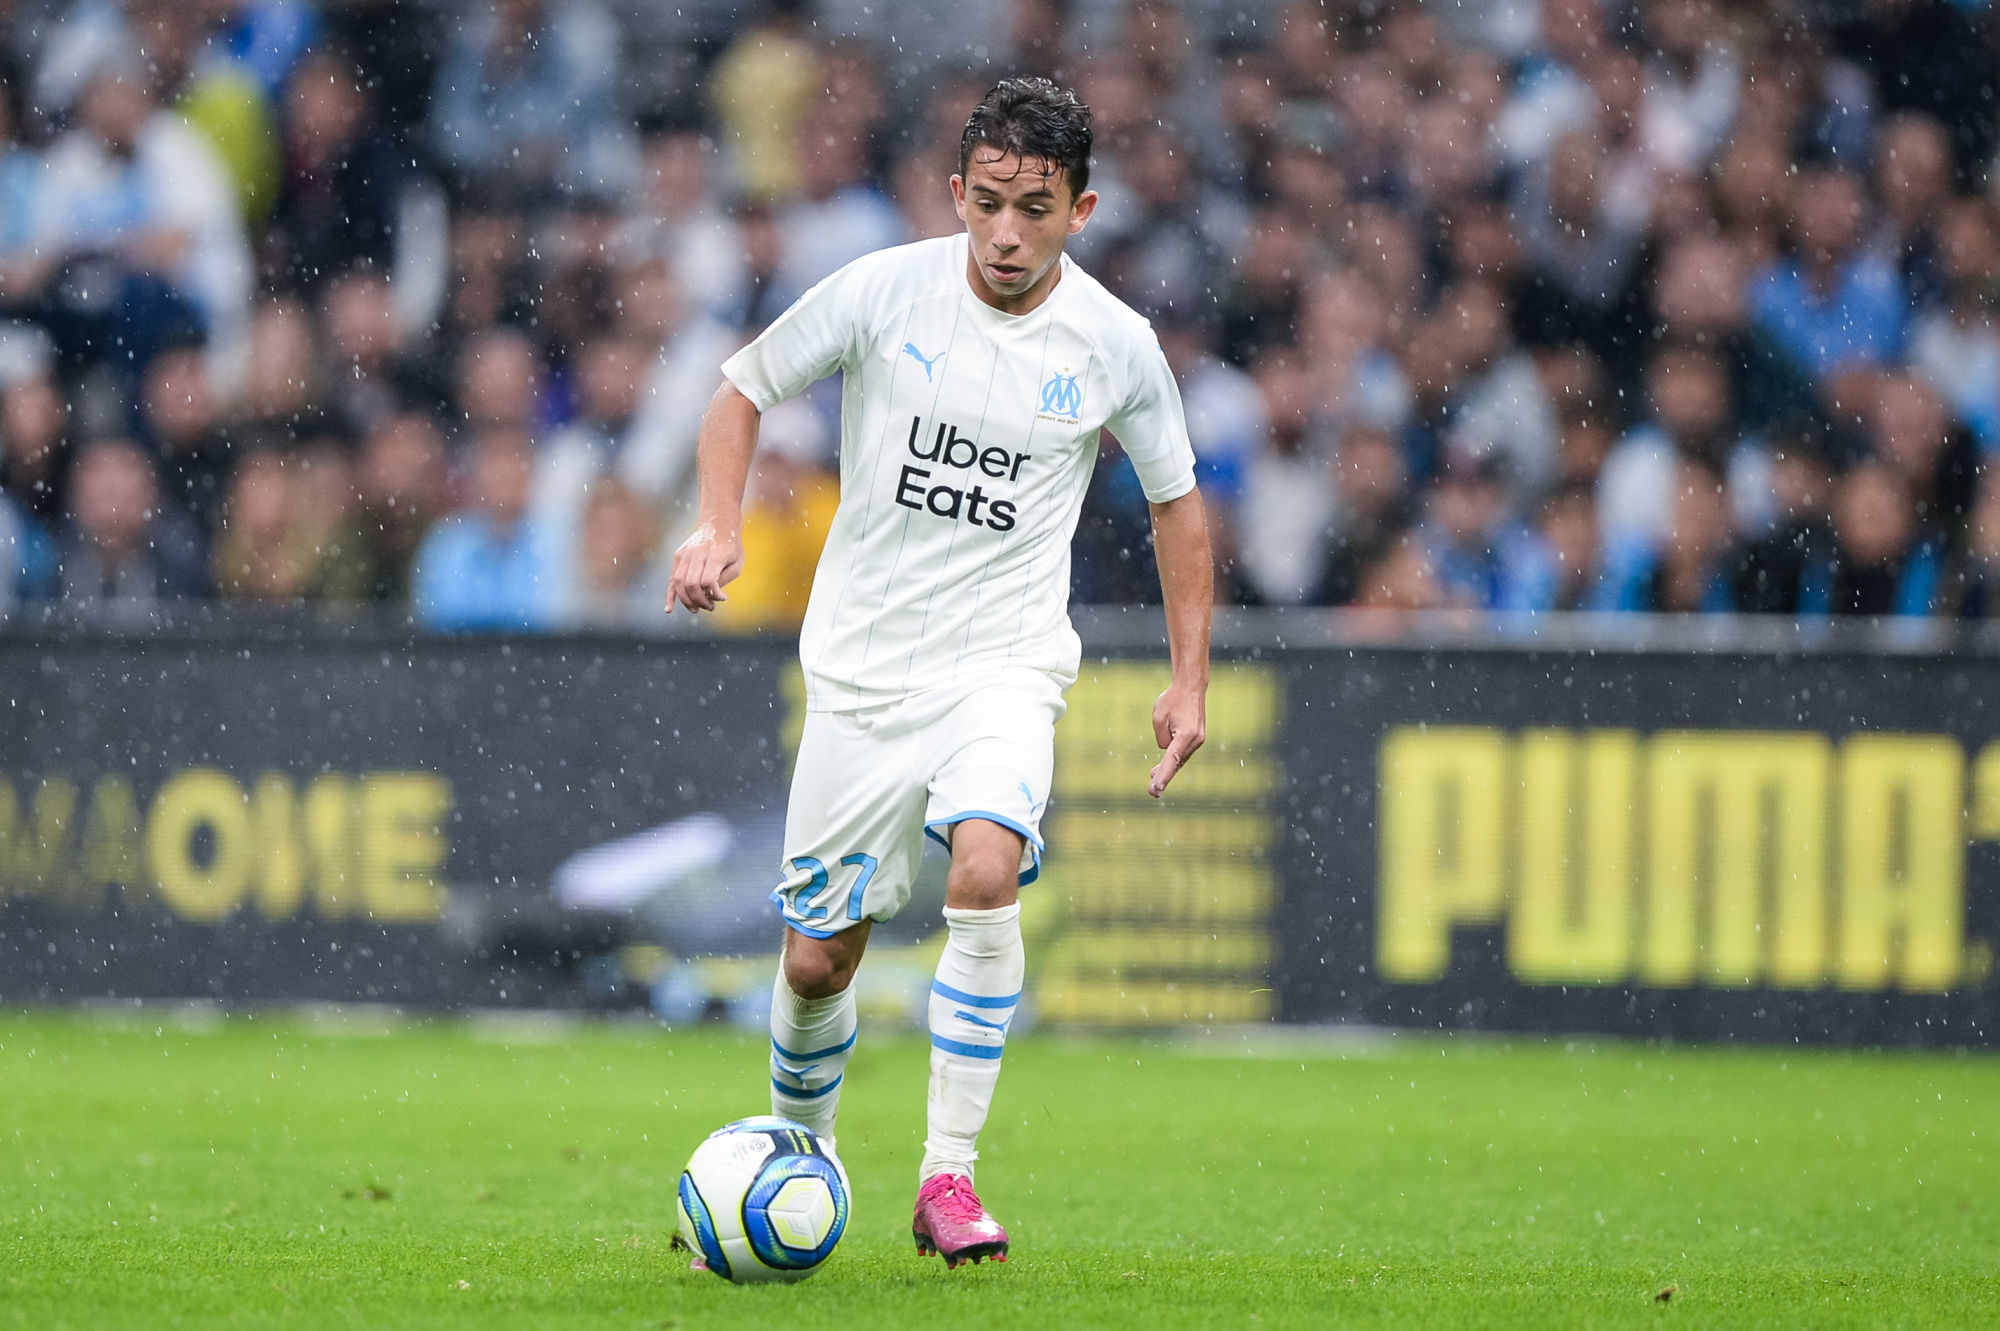 Maxime LOPEZ of Marseille during the French Ligue 1 football match between Marseille and Montpellier on September 21, 2019 in Marseille, France. (Photo by Baptiste Fernandez/Icon Sport) - Maxime LOPEZ - Orange Vélodrome - Marseille (France)